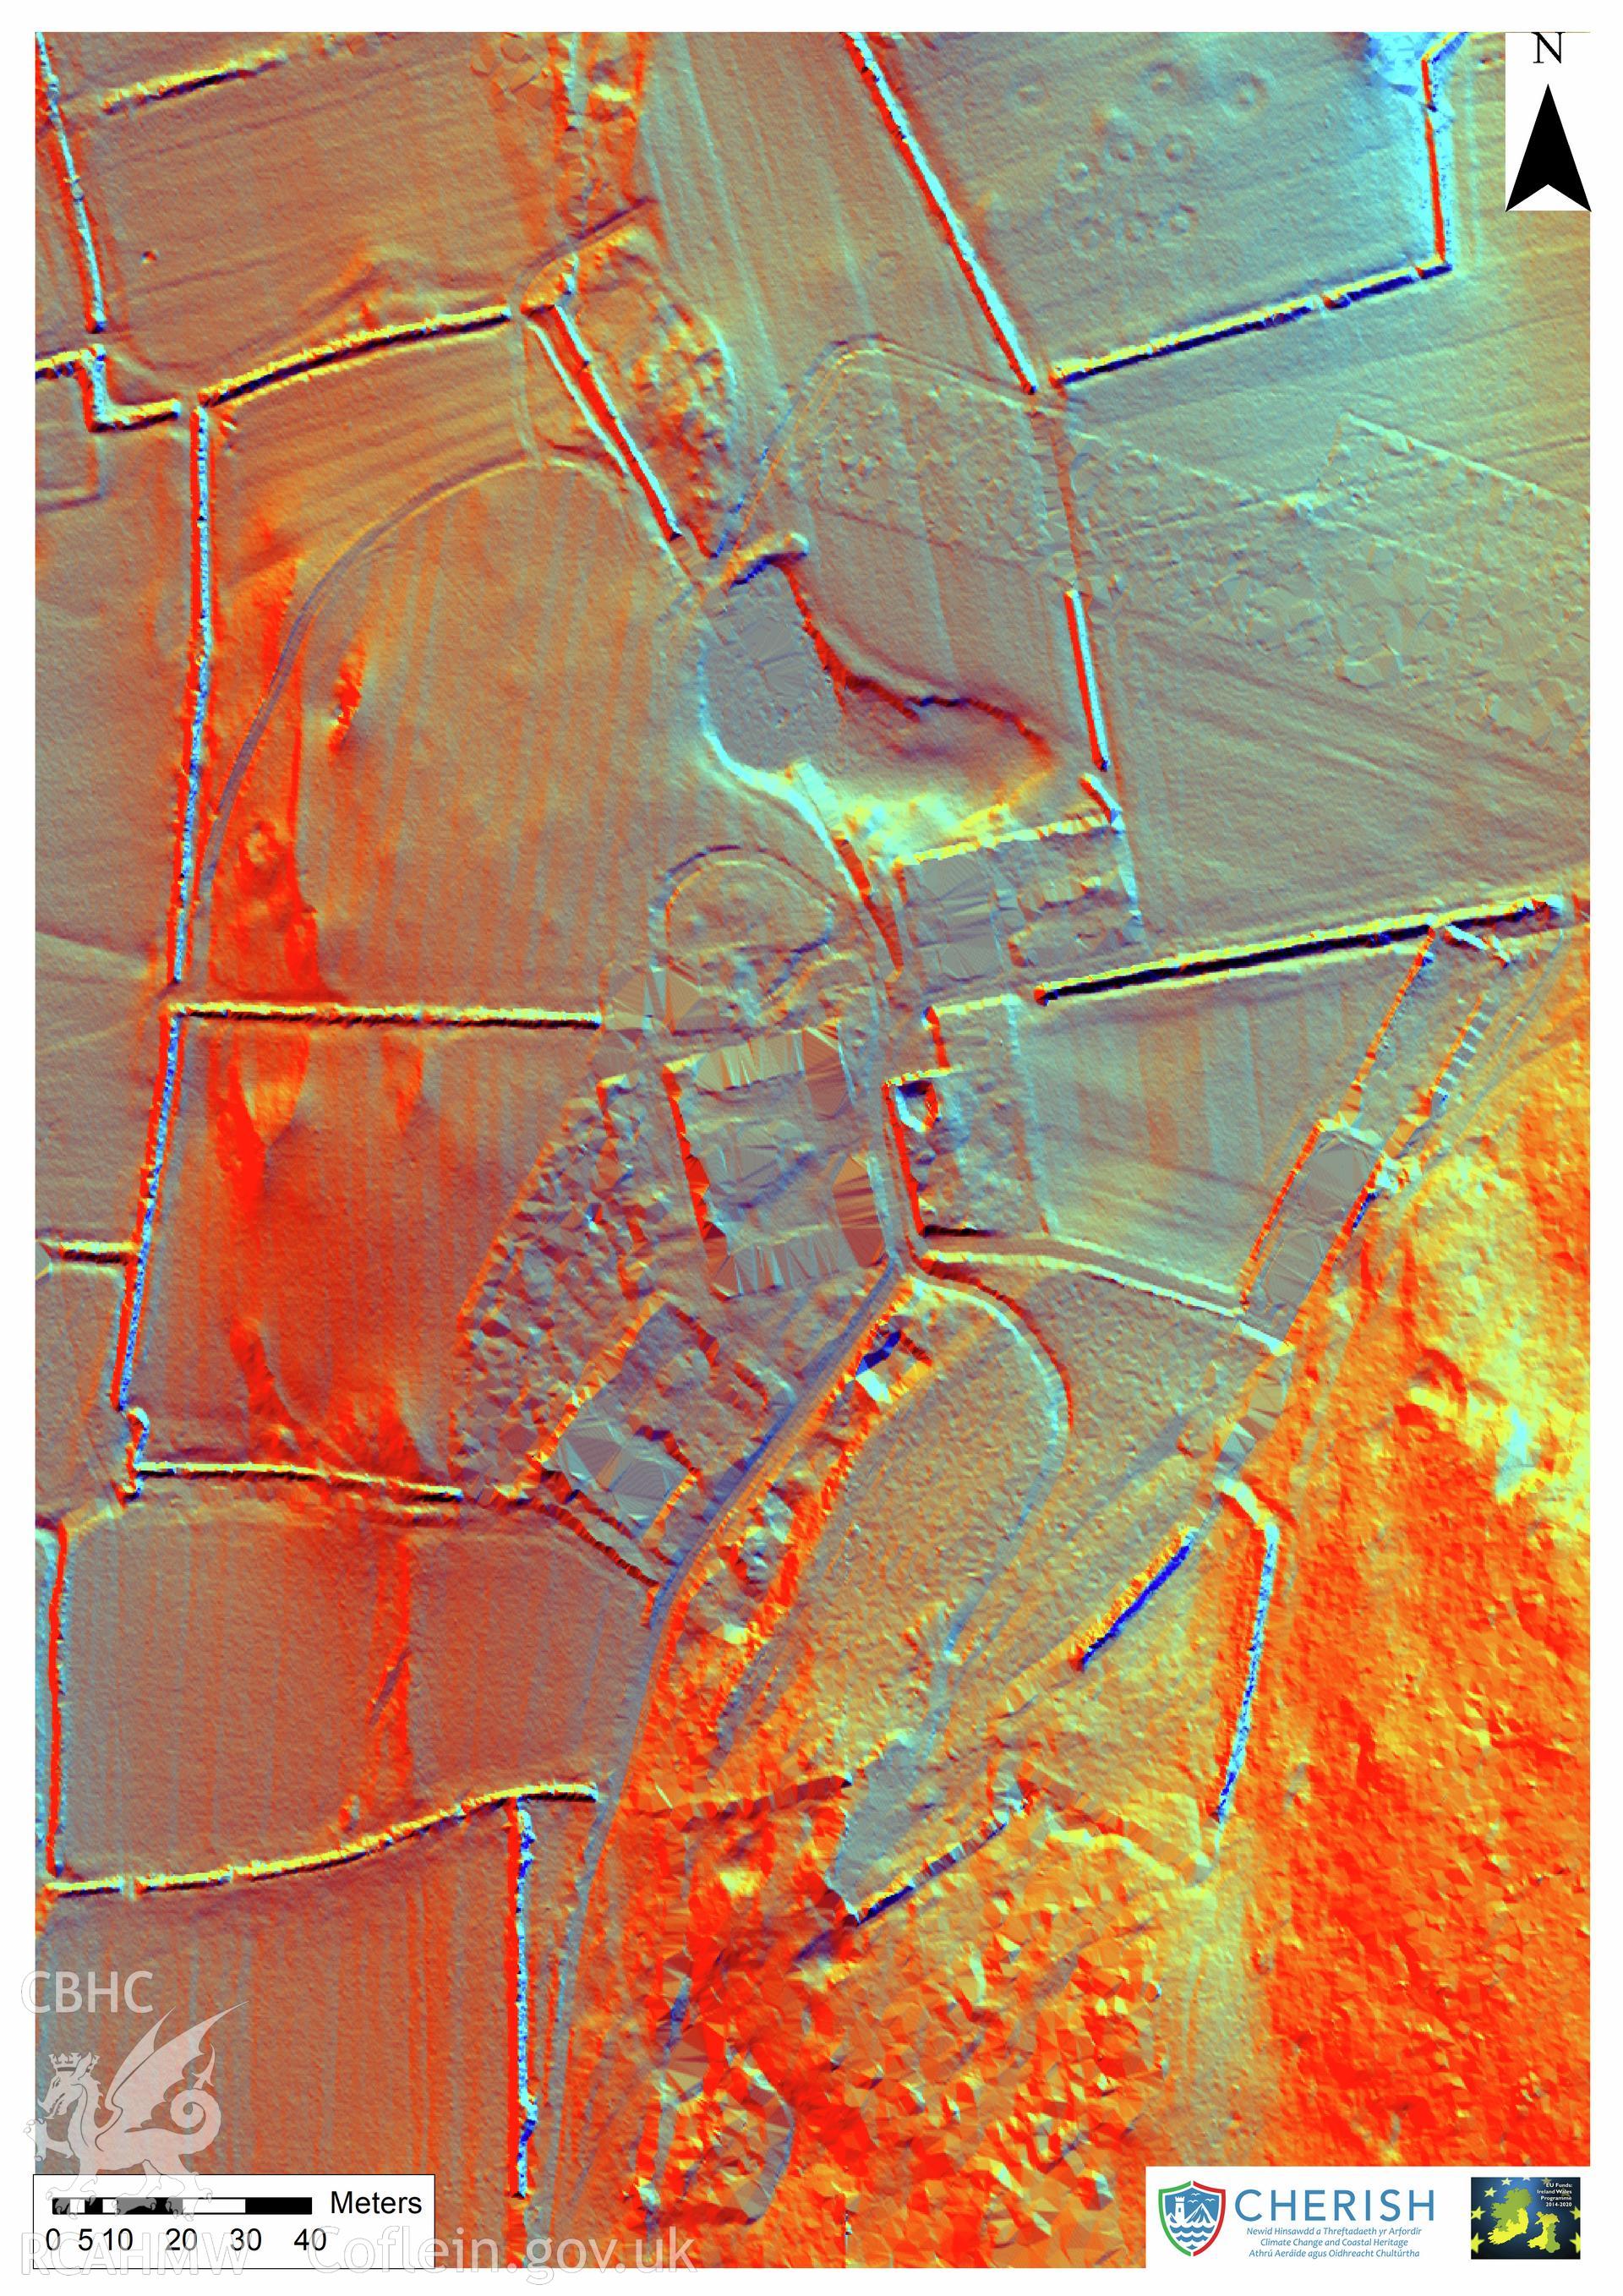 Ynys Enlli (Bardsey Island). Airborne laser scanning (LiDAR) commissioned by the CHERISH Project 2017-2021, flown by Bluesky International LTD at low tide on 24th February 2017. Digital Terrain Model (DTM) showing the north part of the island on which is